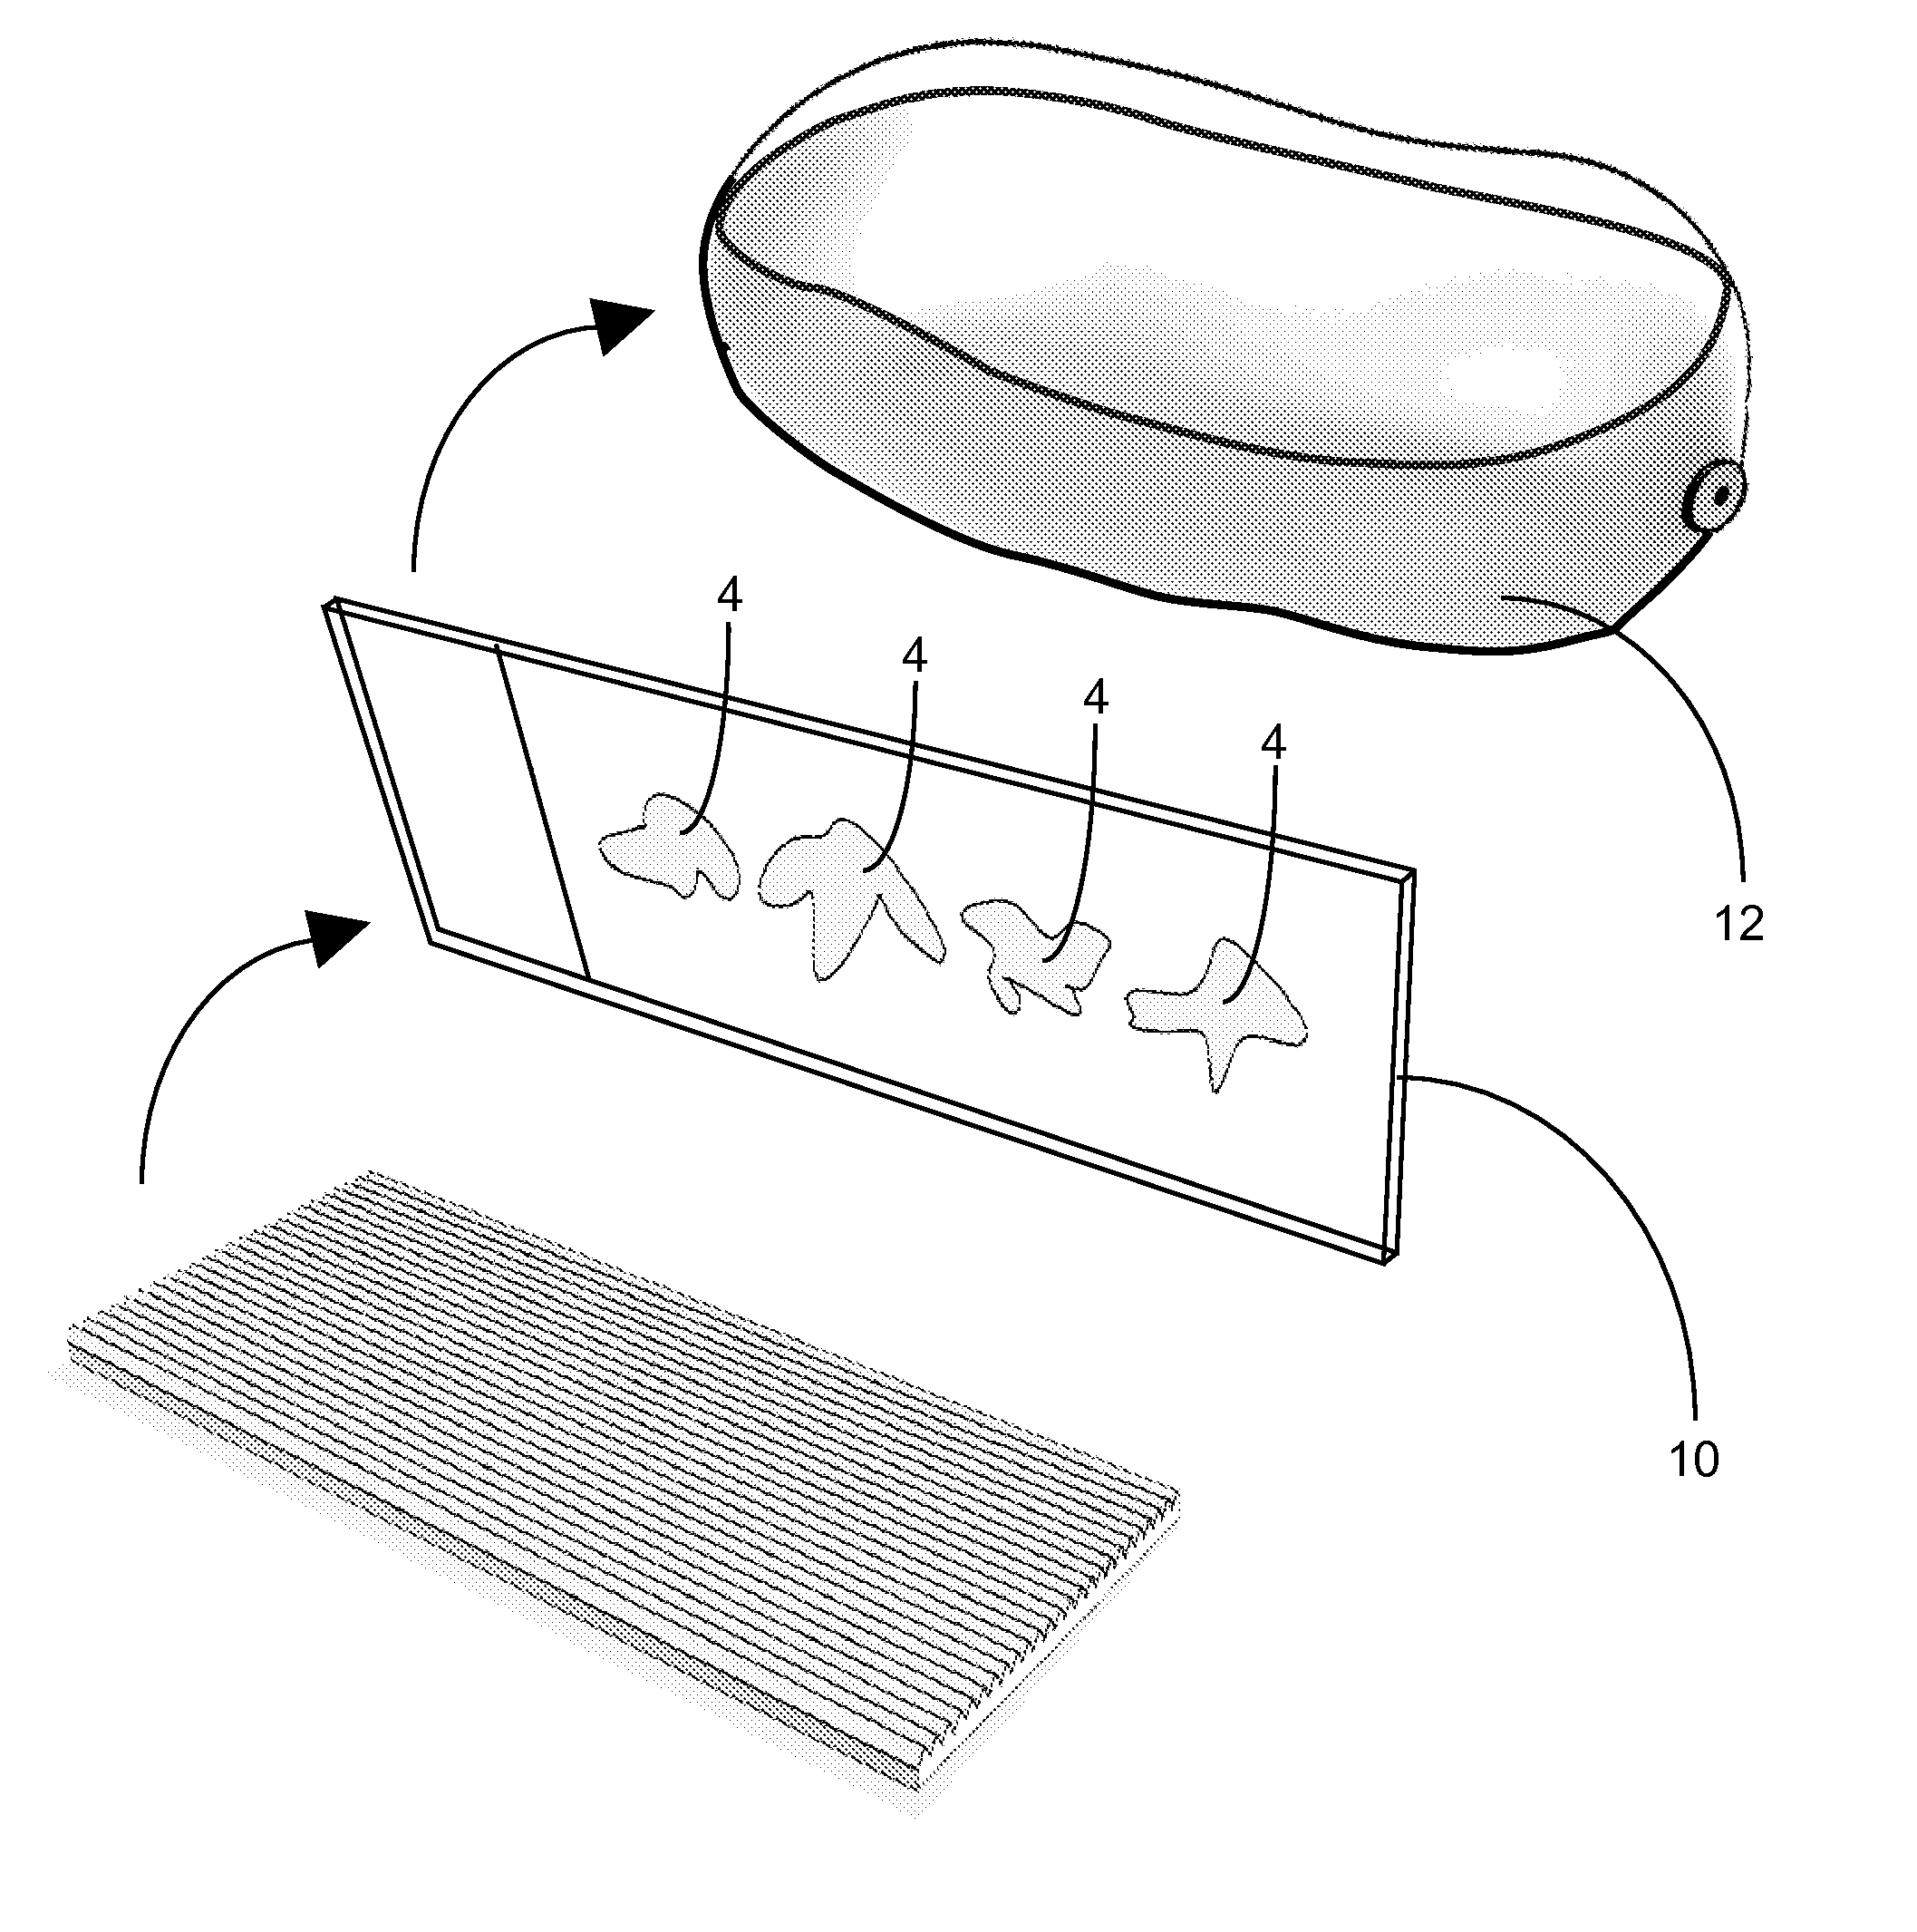 Apparatus and method for affixing frozen tissue sections to glass or membrane microscope slides